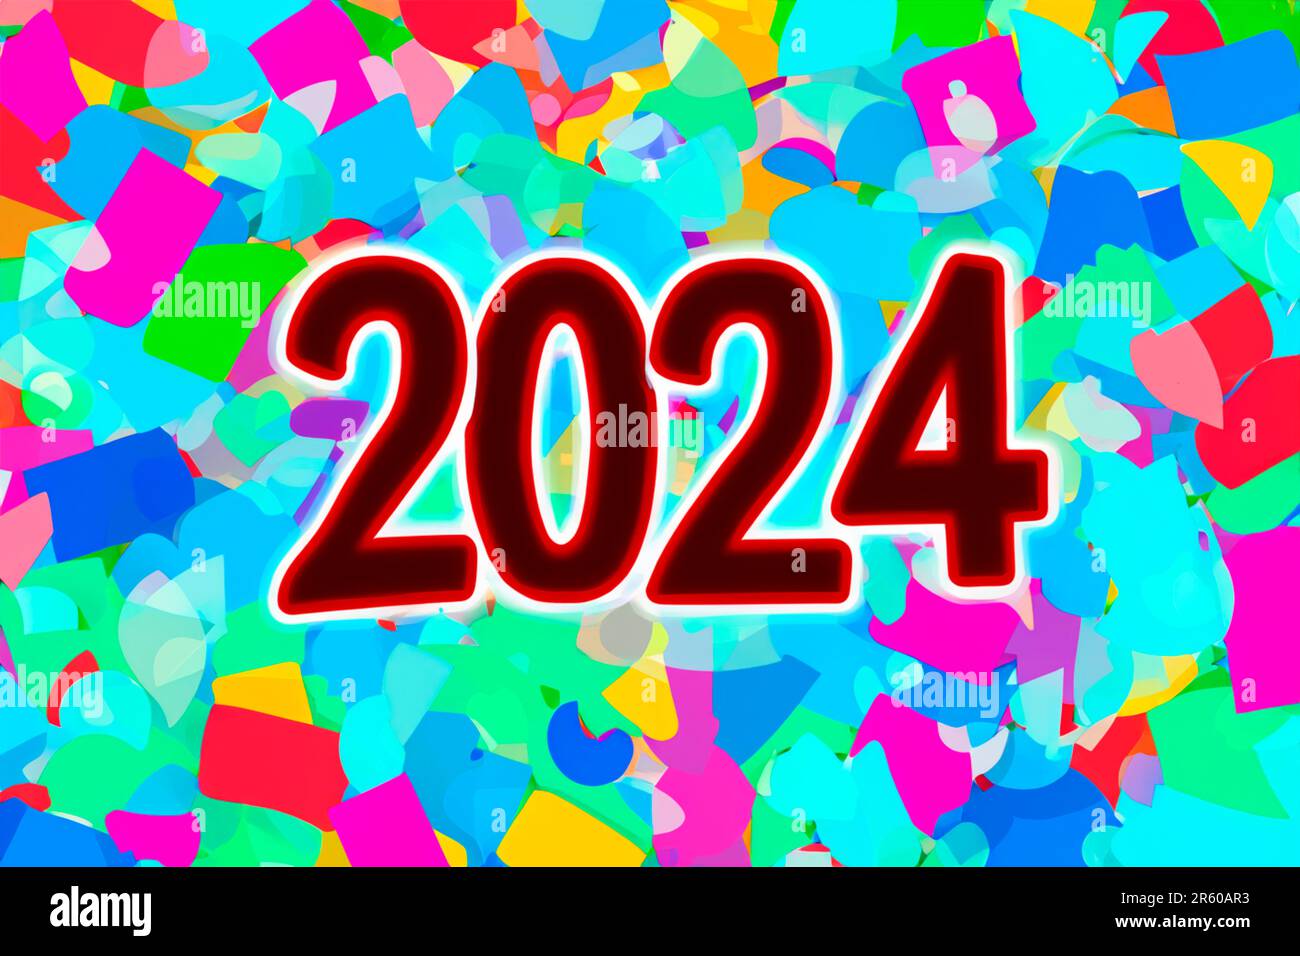 https://c8.alamy.com/comp/2R60AR3/2024-new-year-2024-numbers-on-a-background-of-confetti-horizontal-design-happy-new-year-2024-2R60AR3.jpg